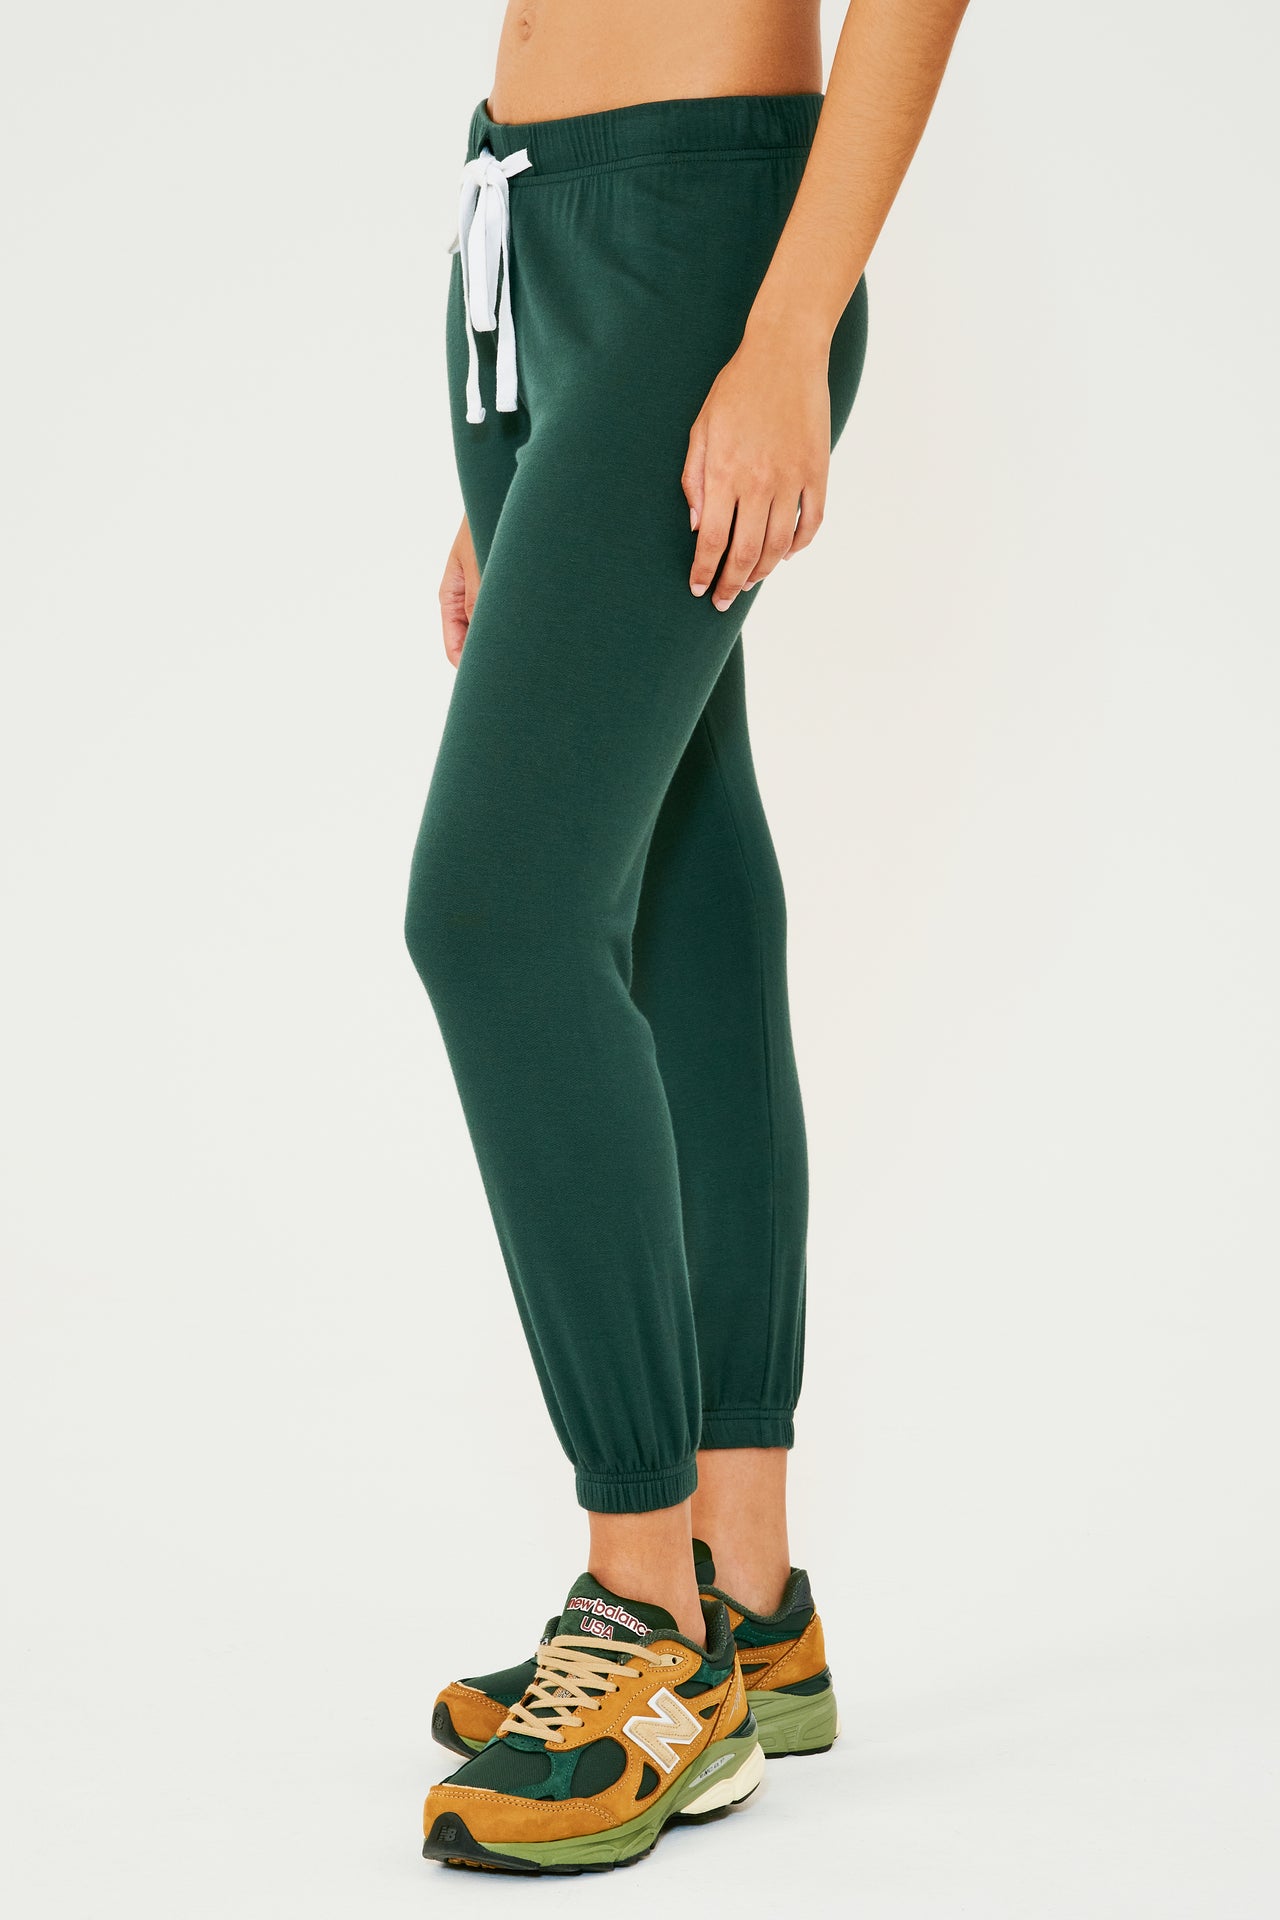 Front side view of woman wearing dark green sweatpant jogger paired with dark green, orange and light green shoes